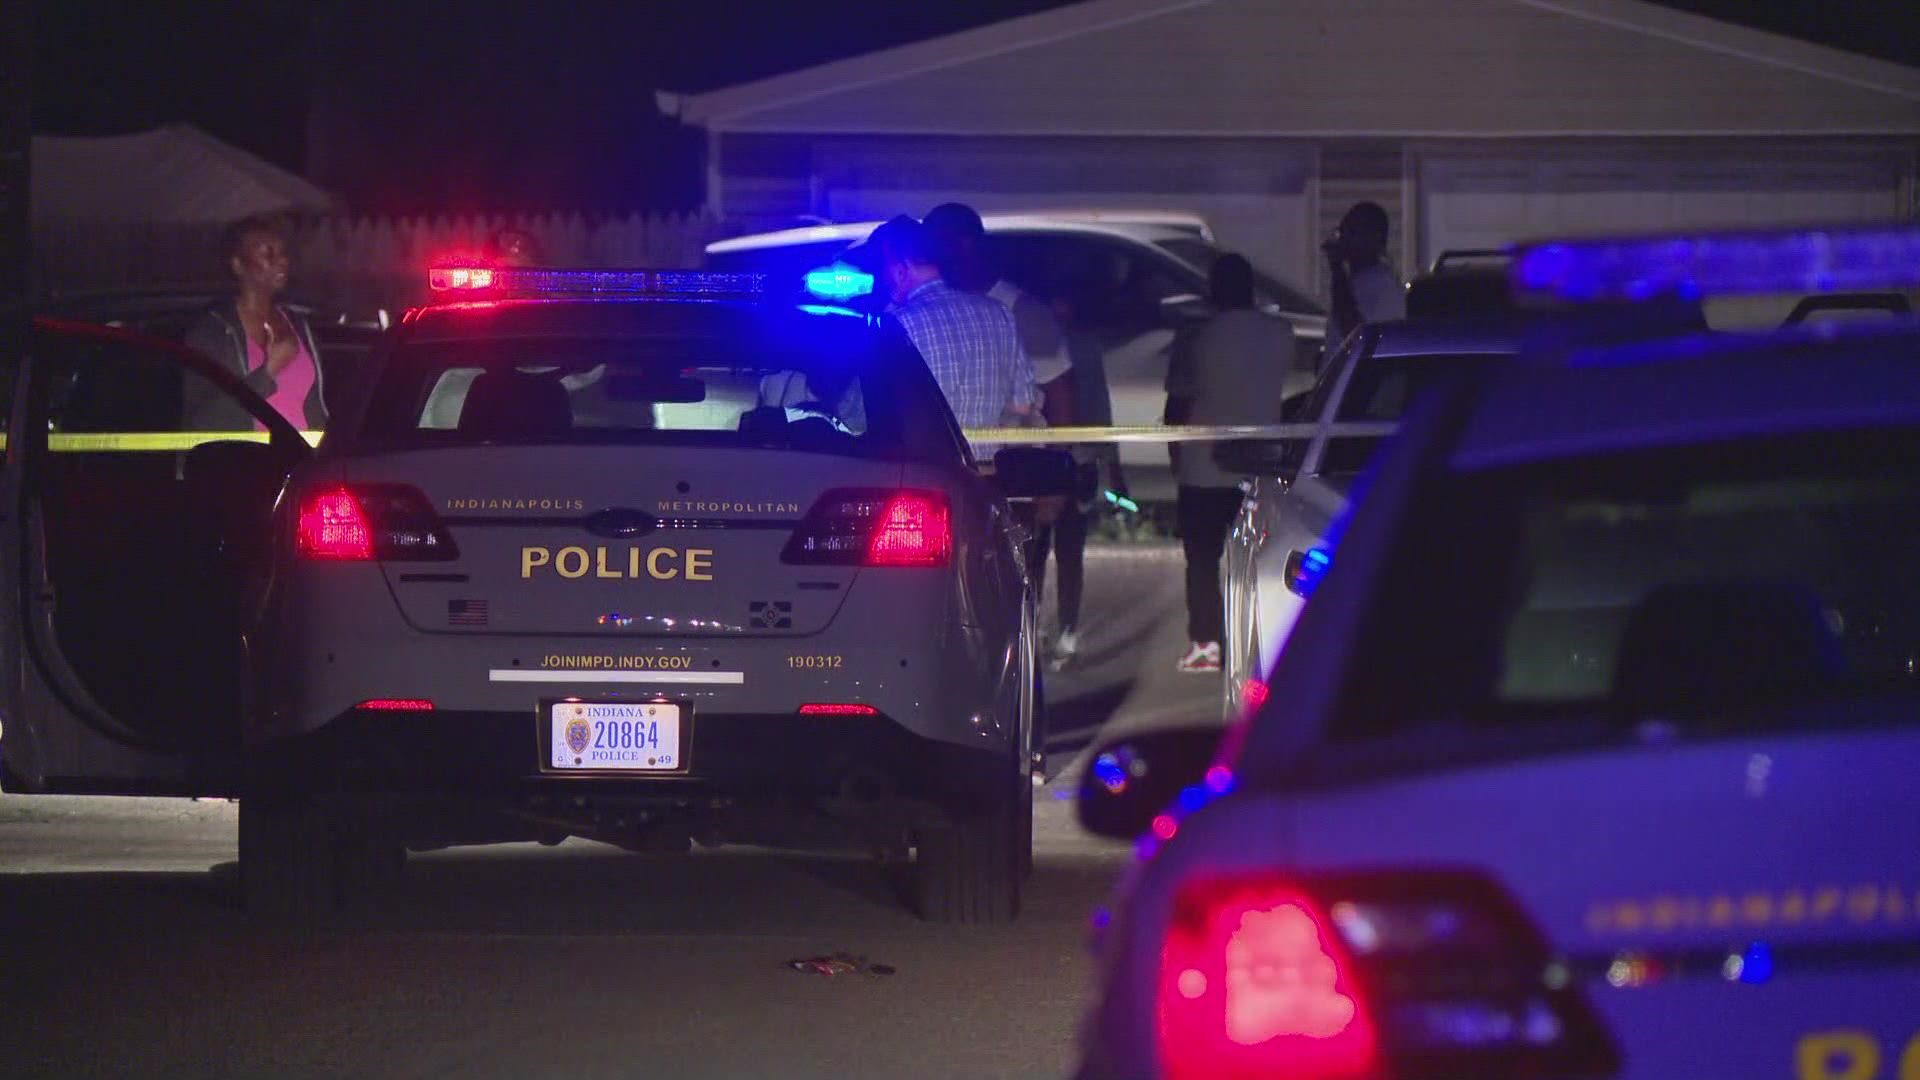 A 45-year-old man is being identified as the victim killed in a shooting on Indy's near westside.